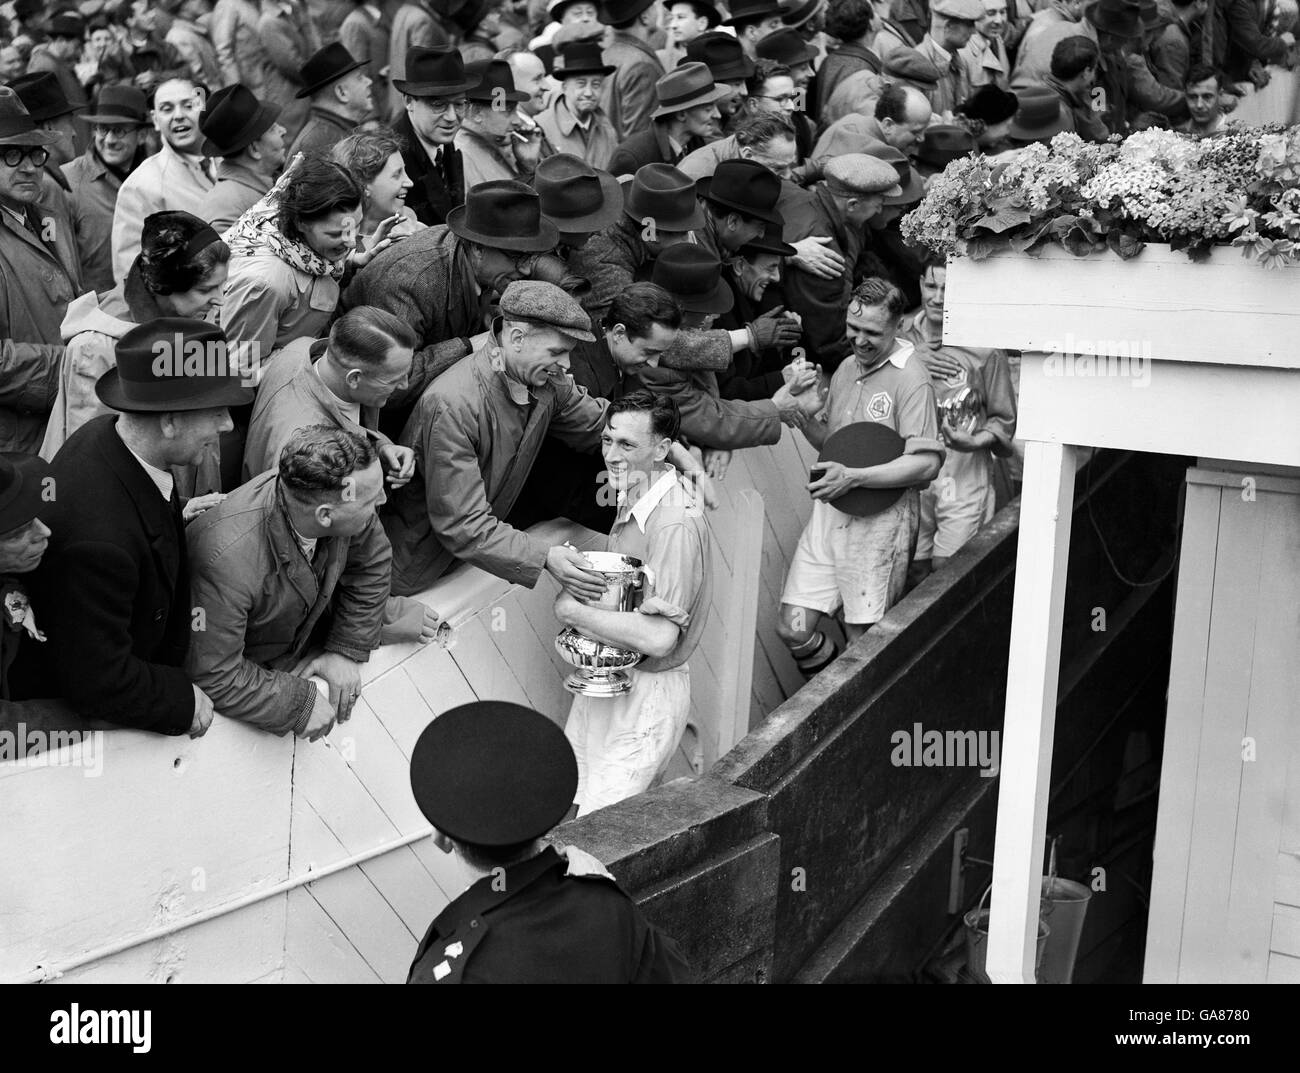 Soccer - FA Cup Final - Arsenal v Liverpool - Wembley Stadium. Arsenal Captain Joe Mercer is mobbed by their fans after receiving the FA Cup Trophy. Stock Photo